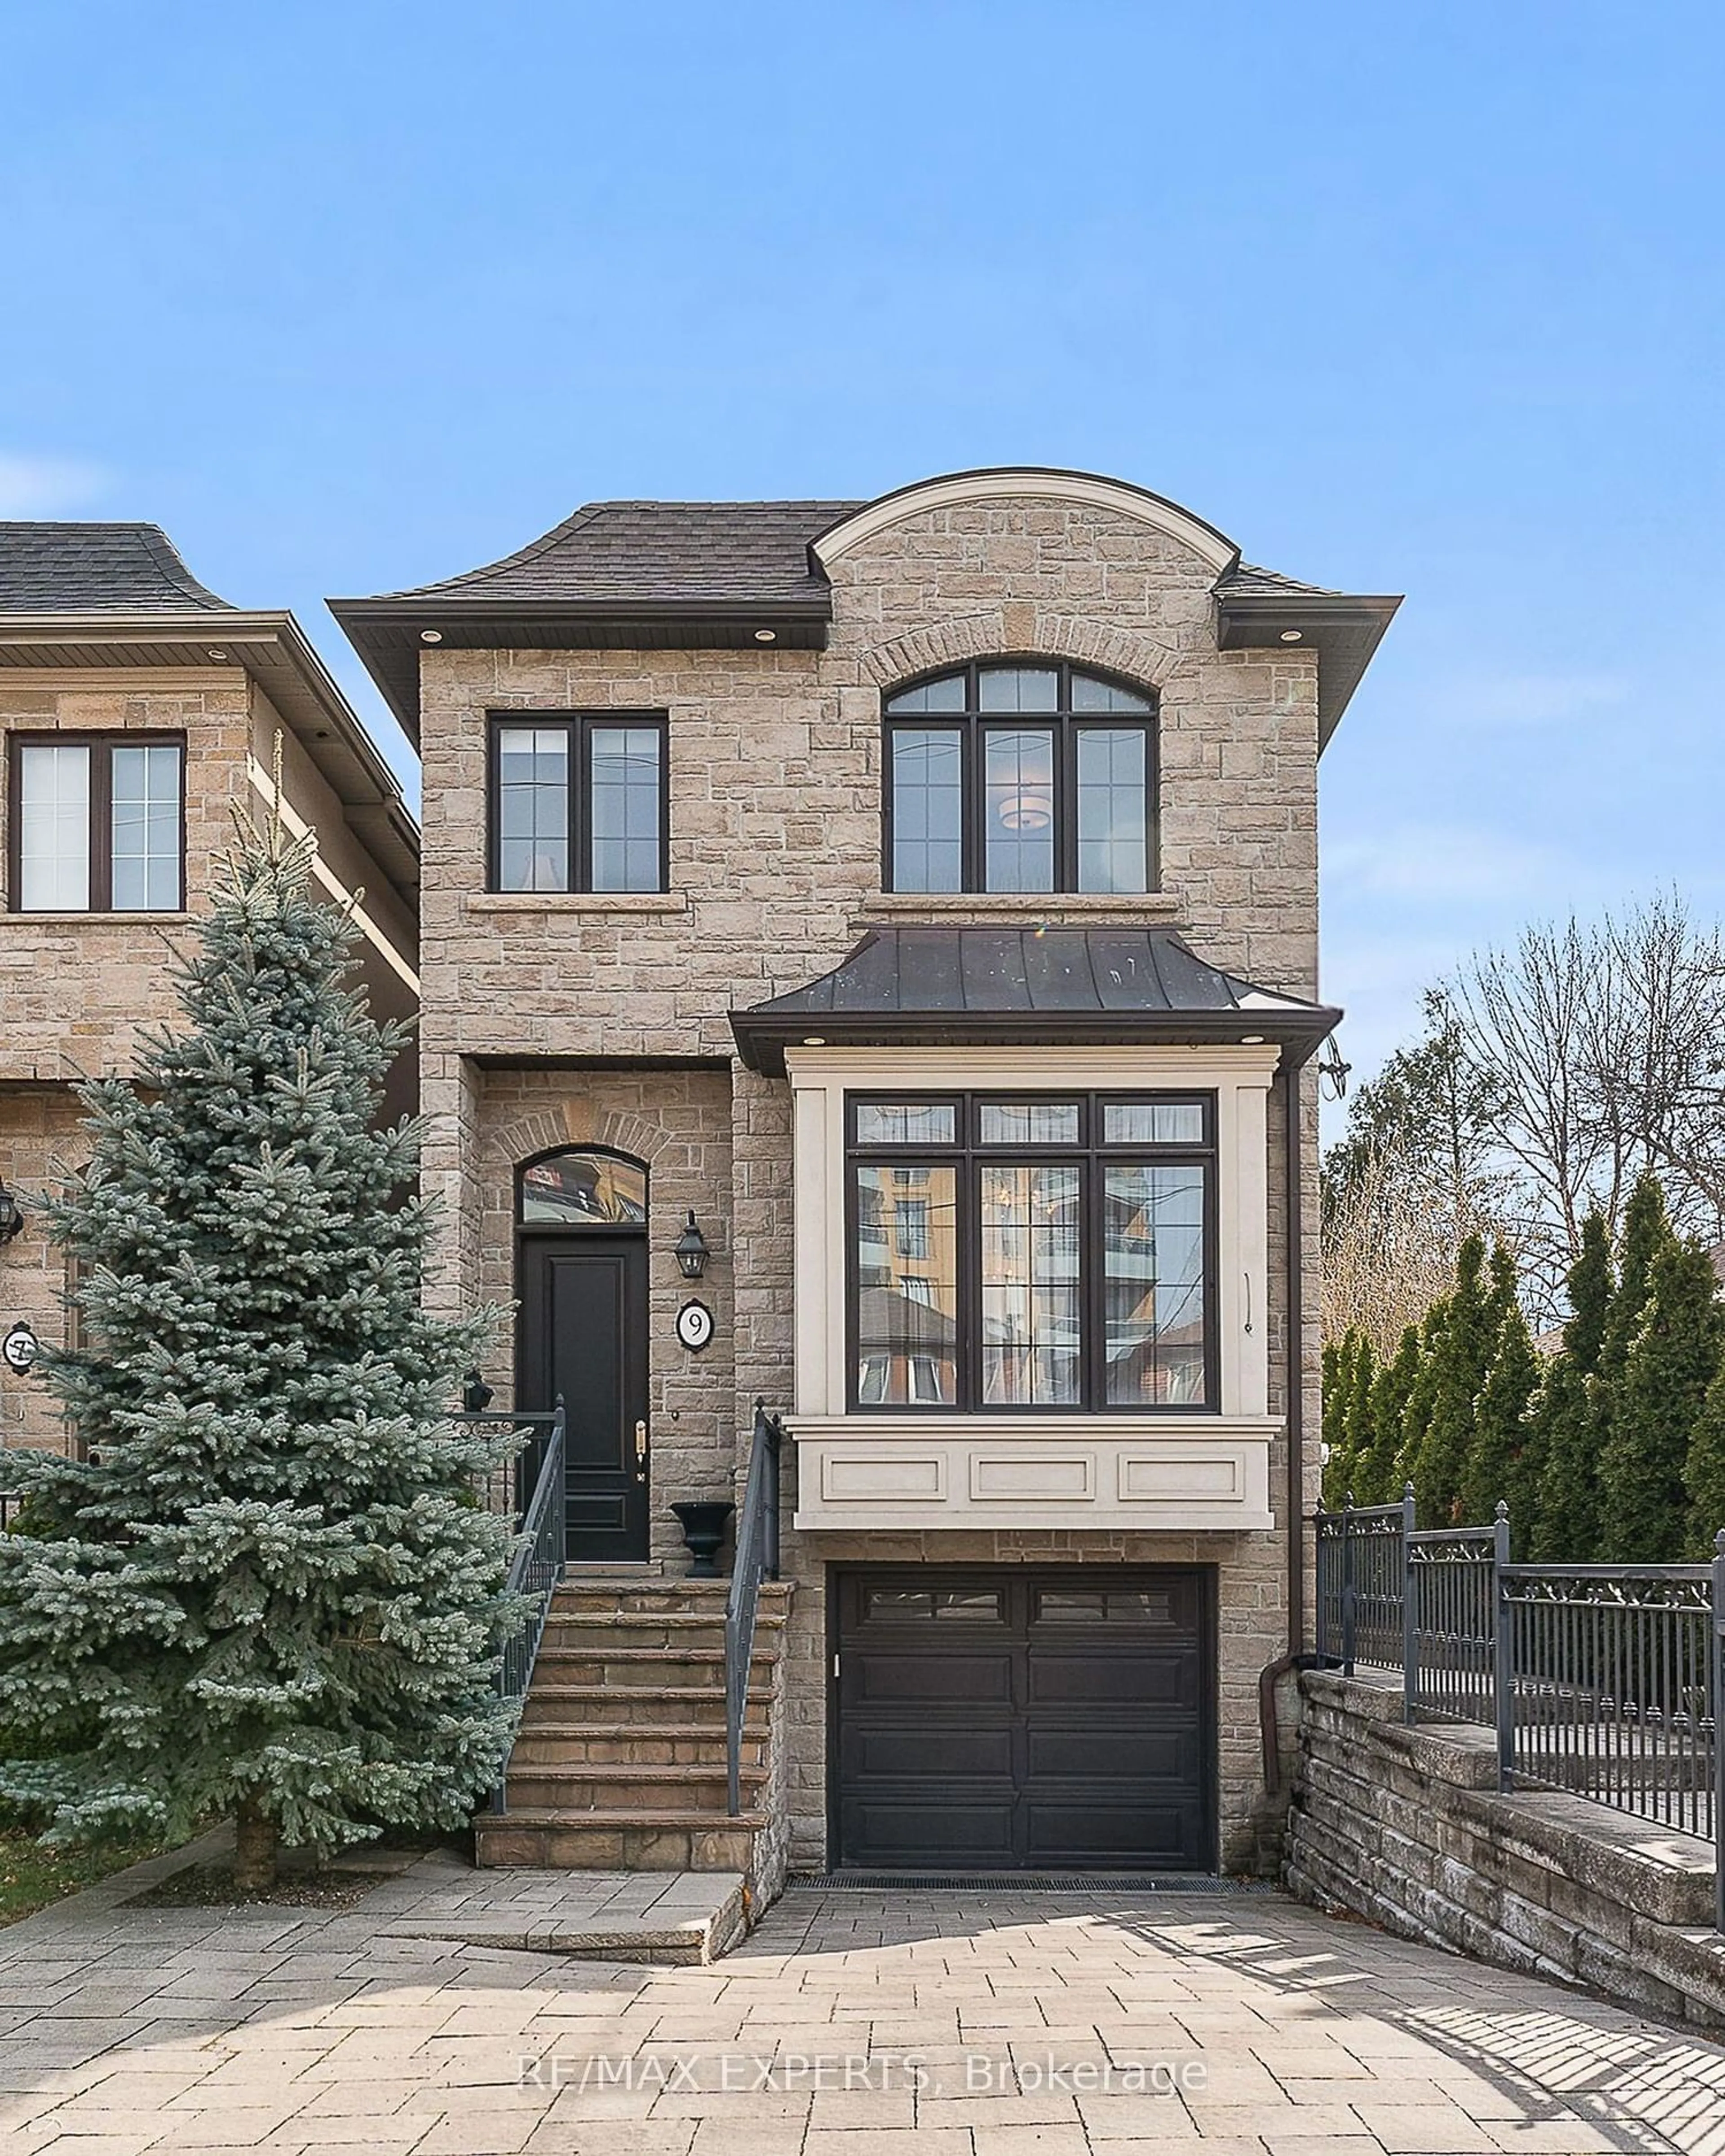 Home with brick exterior material for 9 Fairholme Ave, Toronto Ontario M6B 2W4